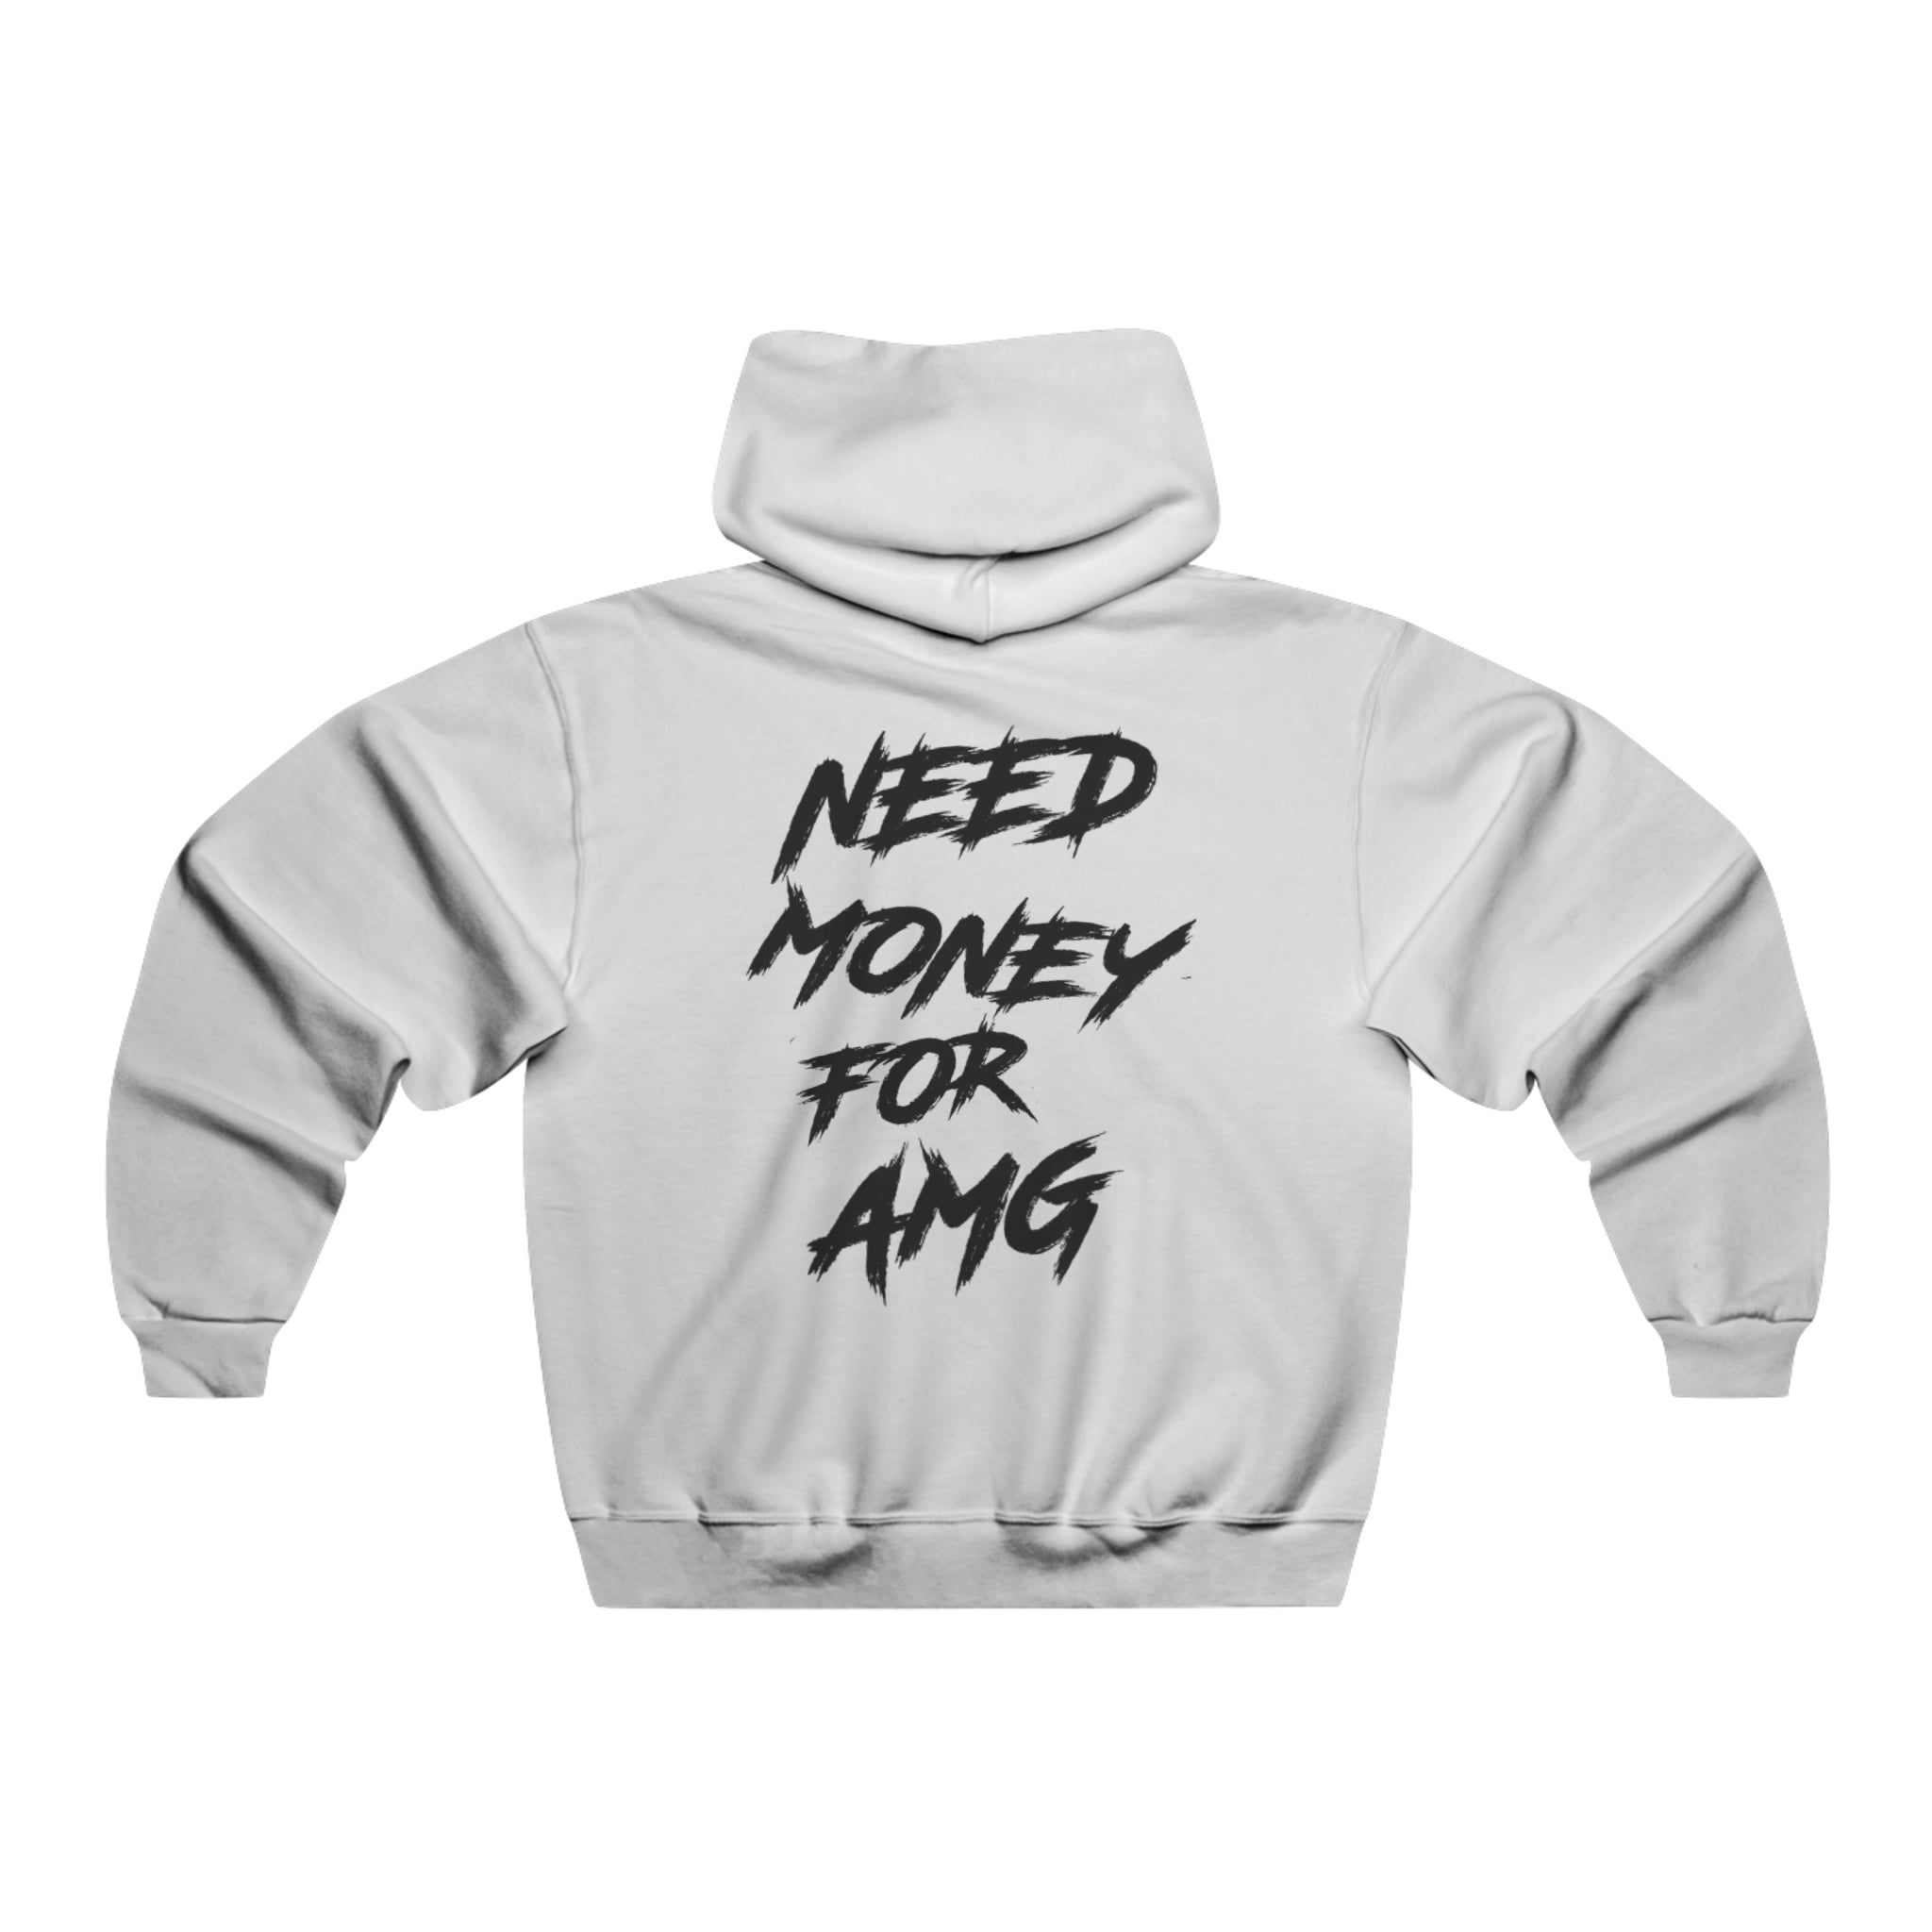 Need Money For AMG Hoodie